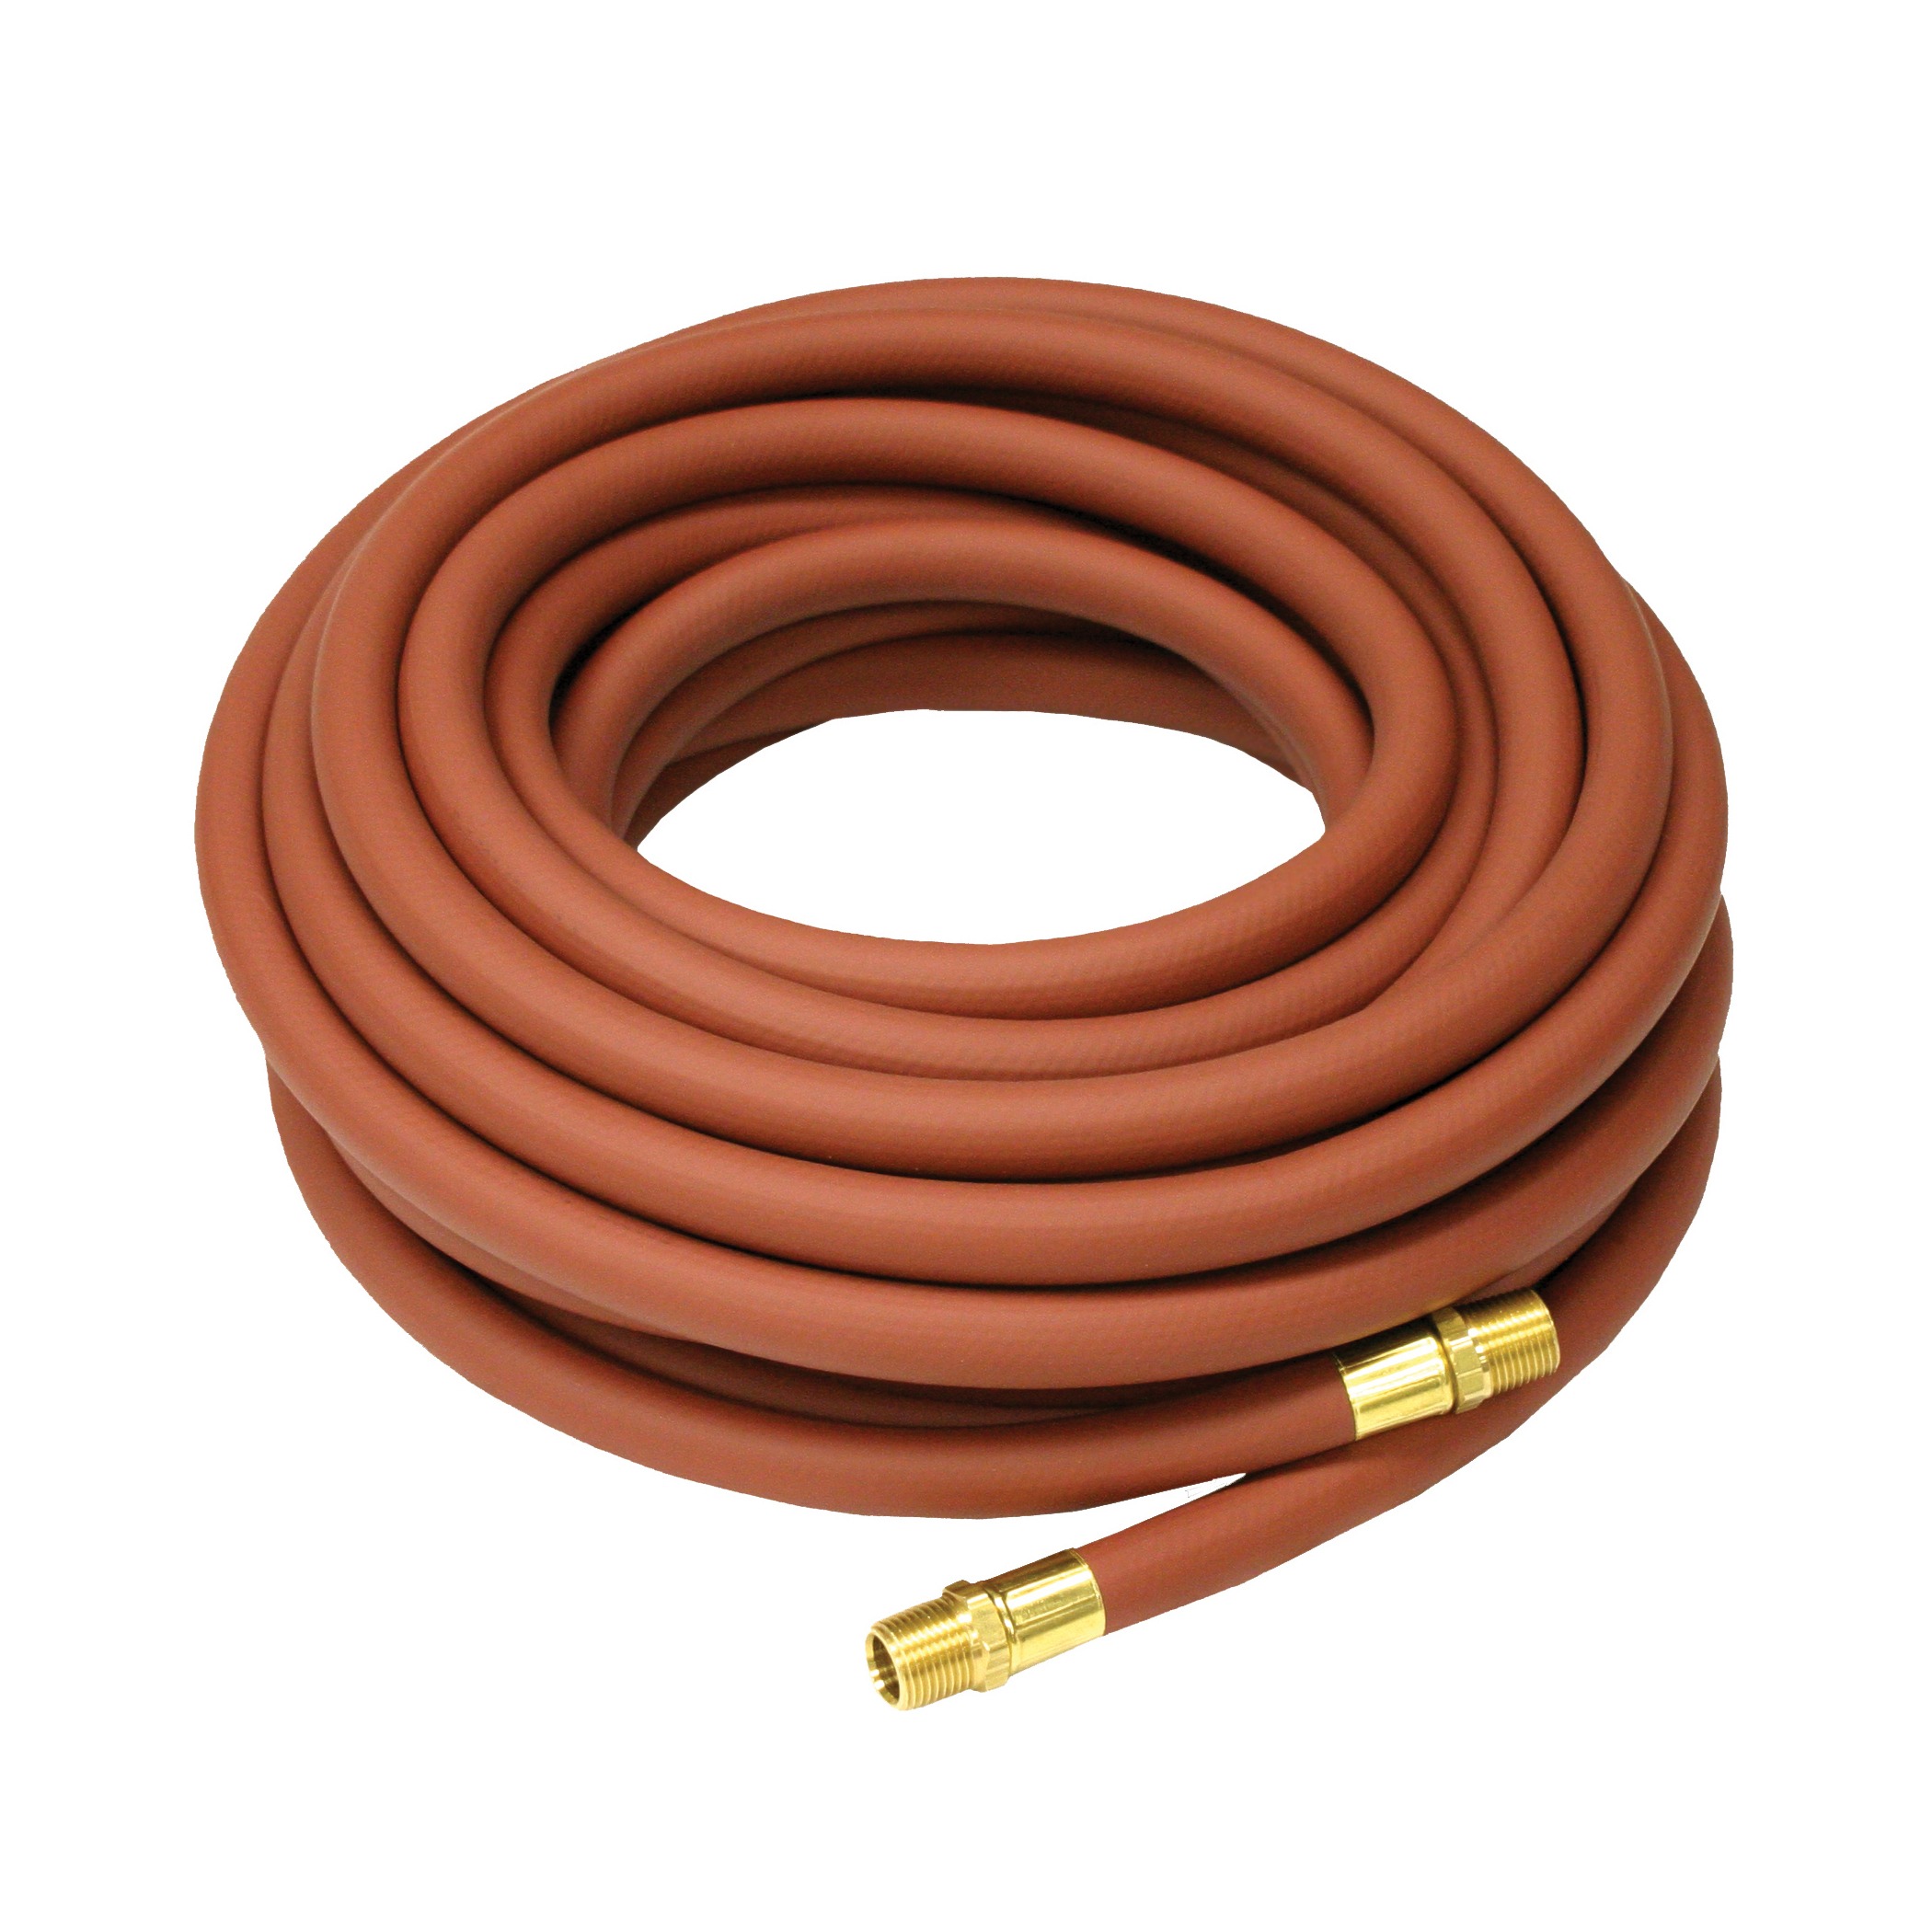 Reelcraft S601021-50 - 1/2 in. x 50 ft. Low Pressure Air/Water Hose